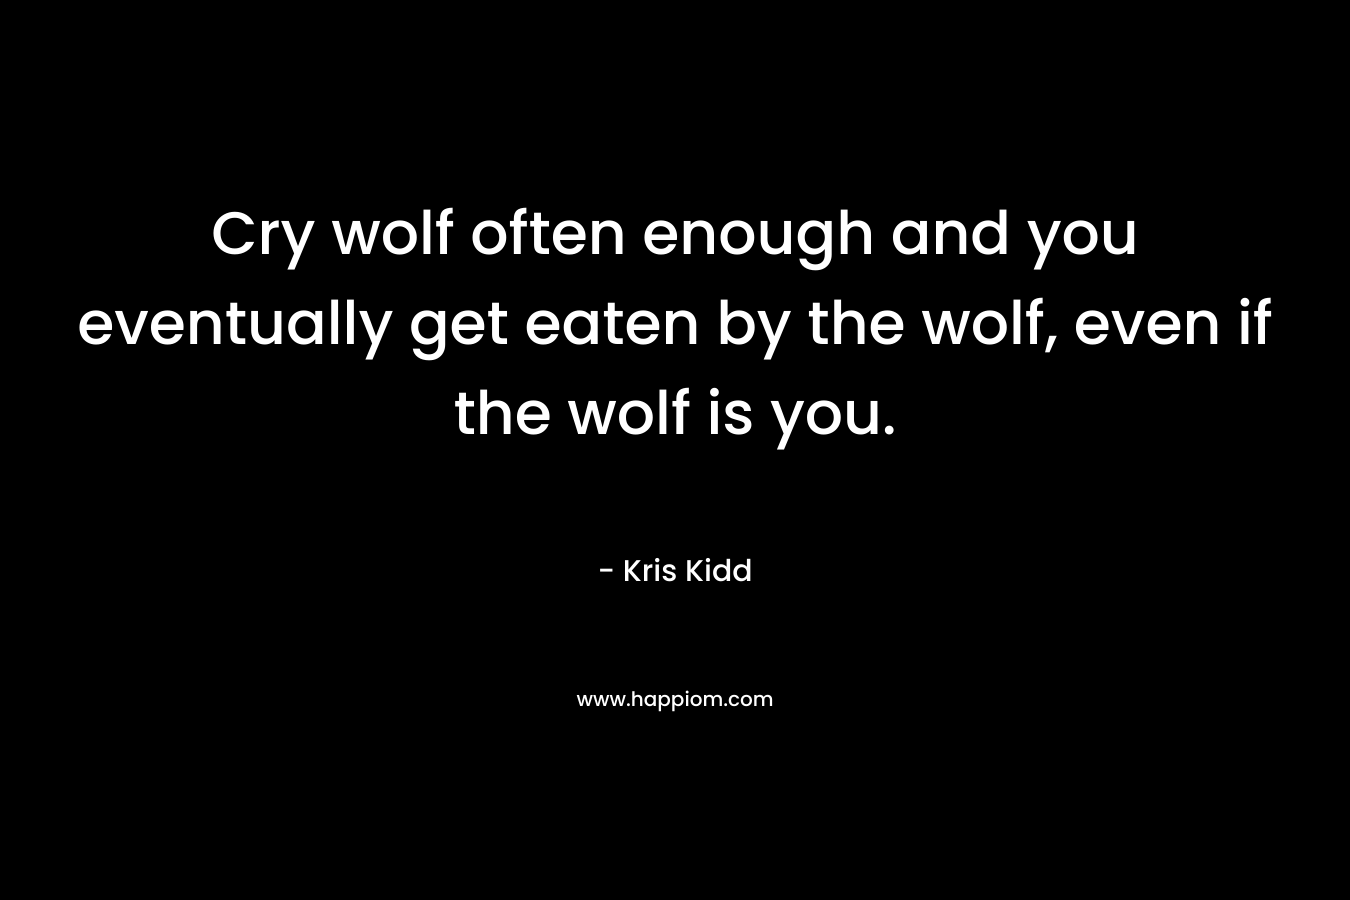 Cry wolf often enough and you eventually get eaten by the wolf, even if the wolf is you. – Kris Kidd